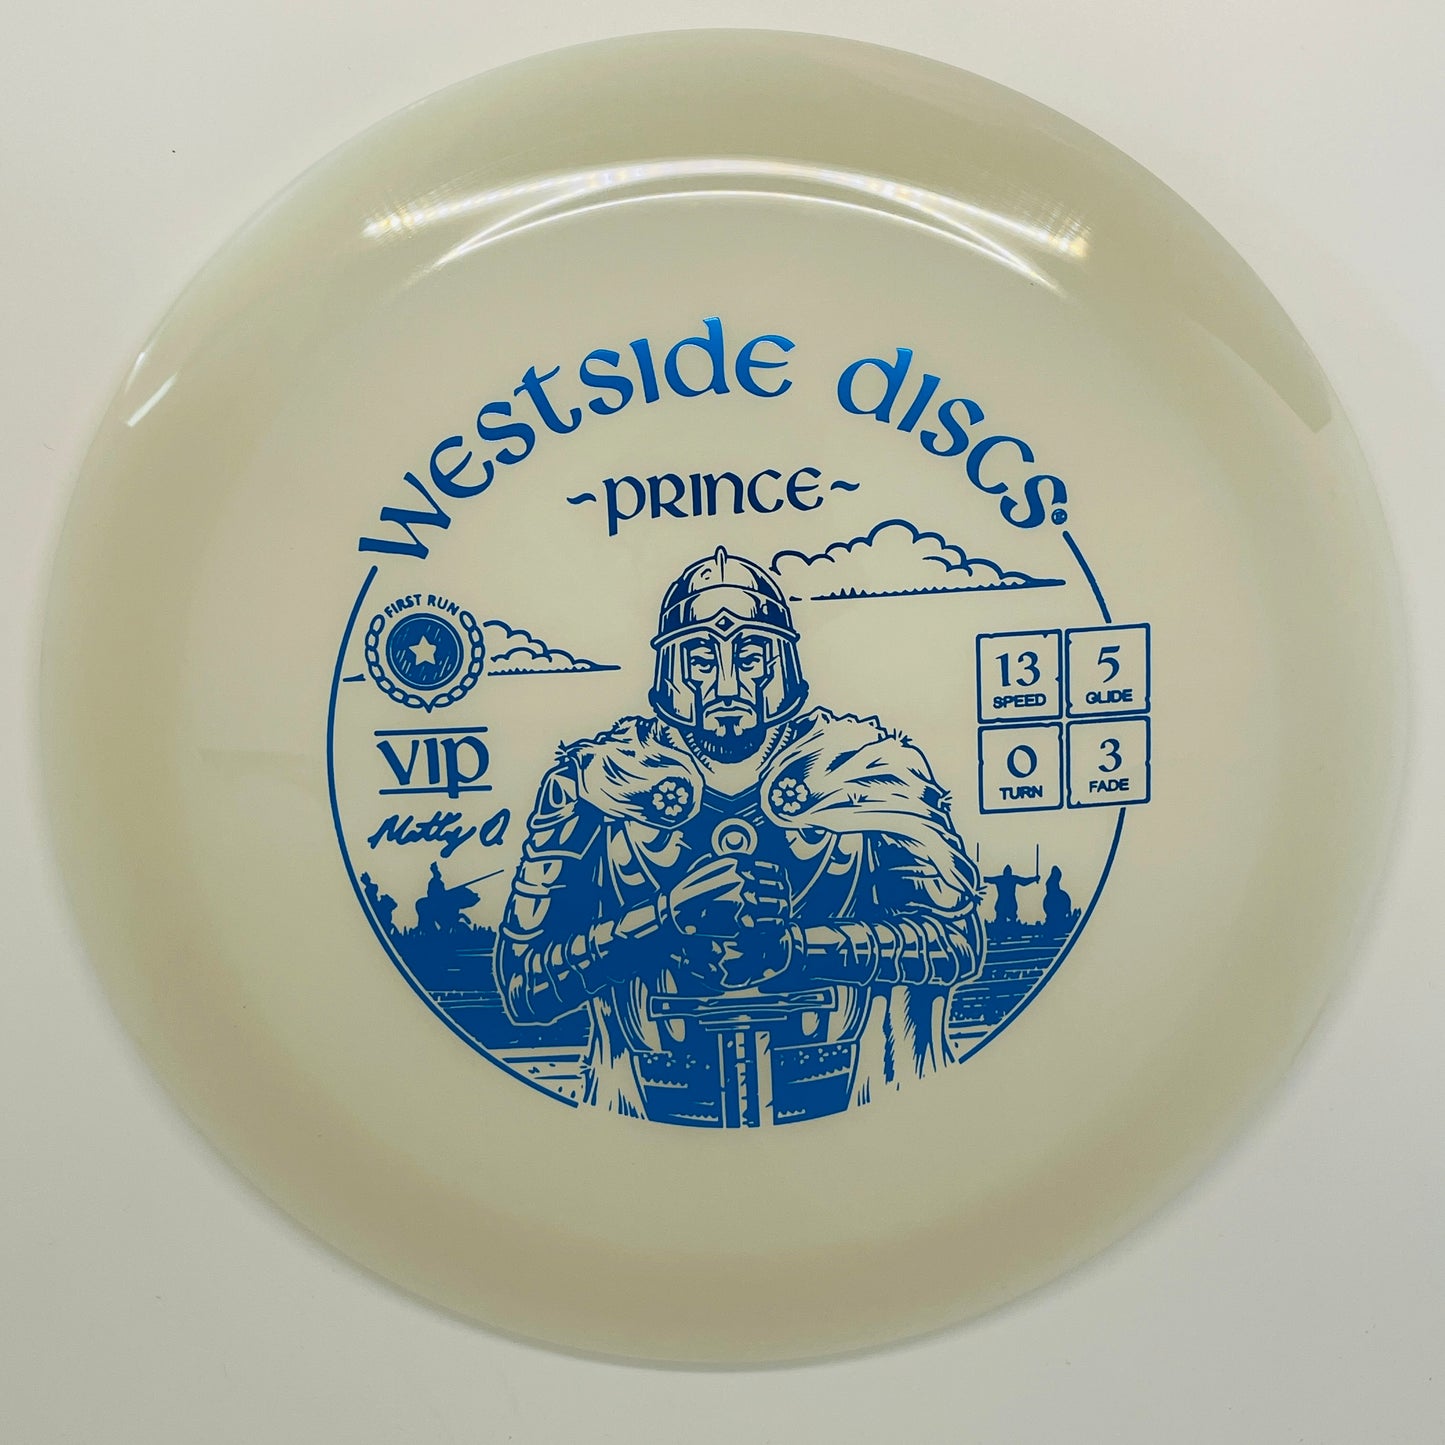 Westside Discs VIP First Run Prince - Distance Driver